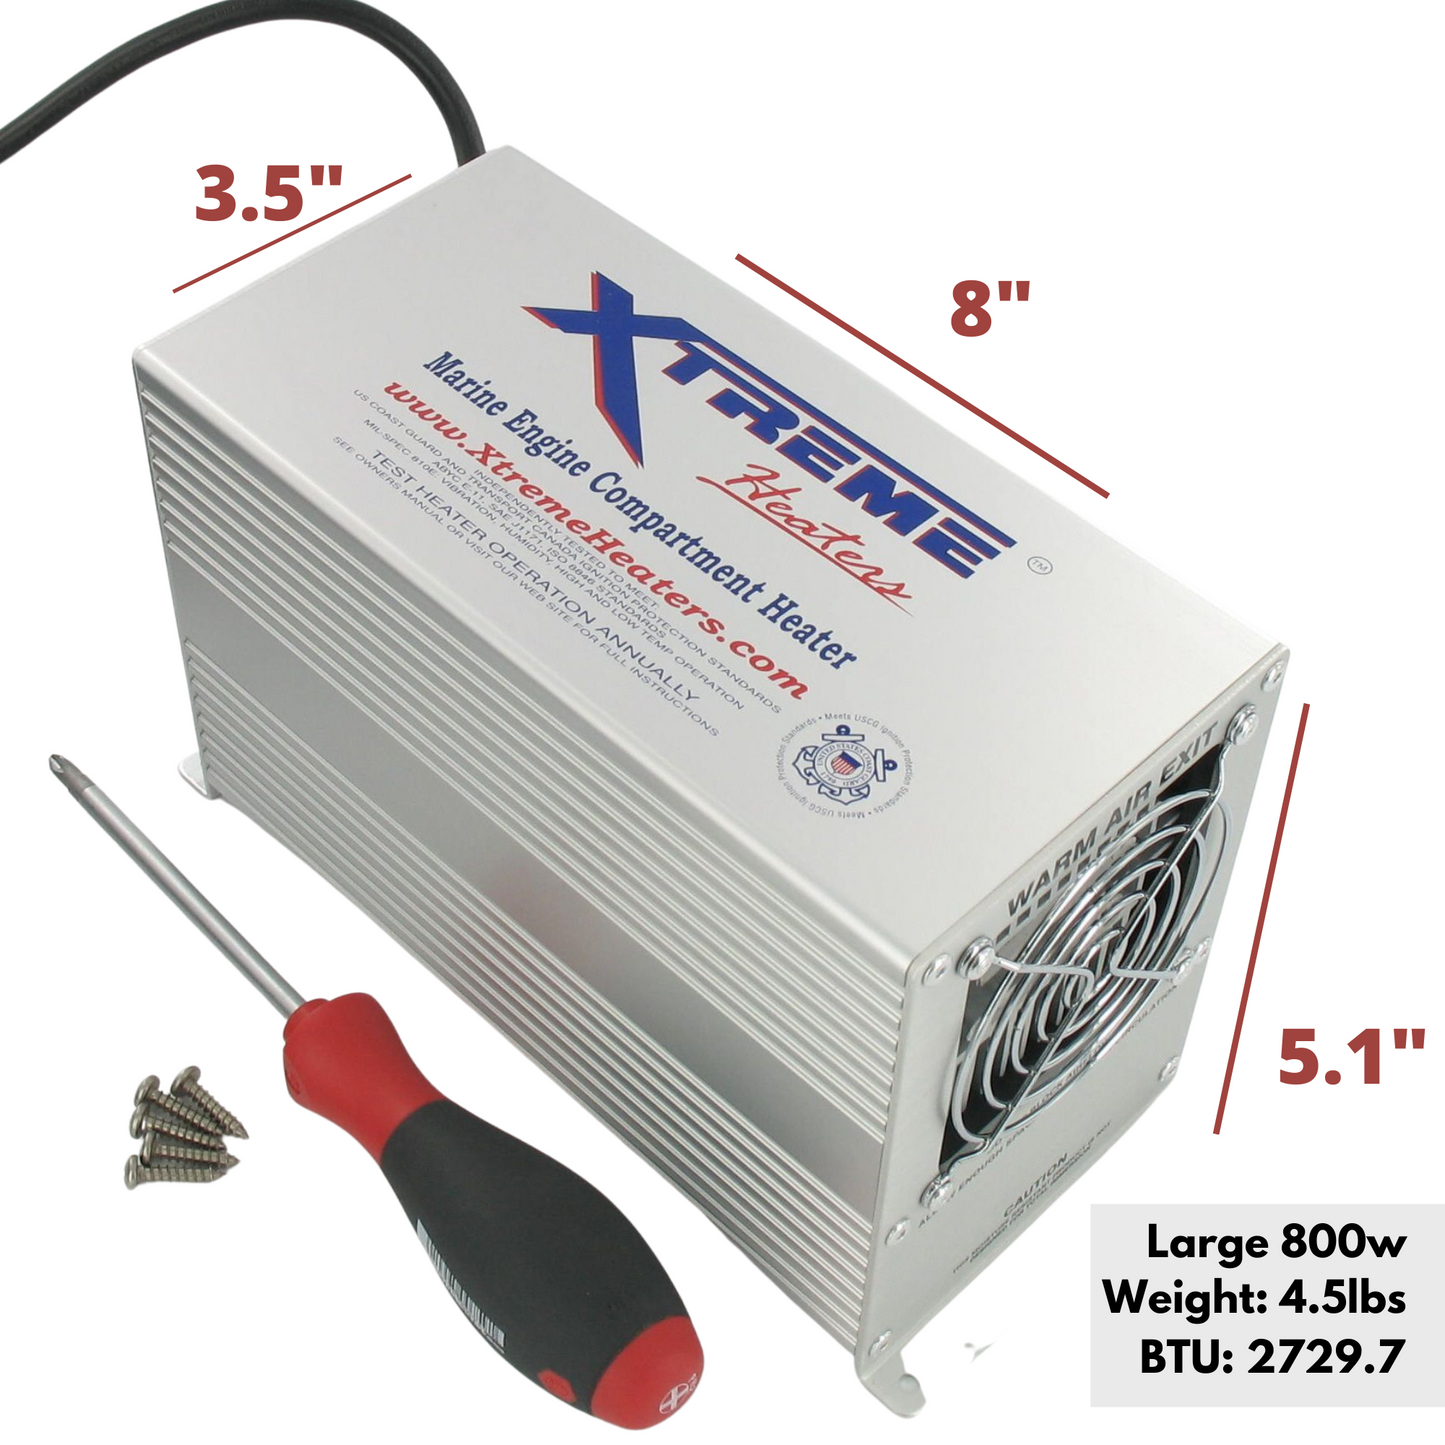 Xtreme-Heater-800w-Dimensions